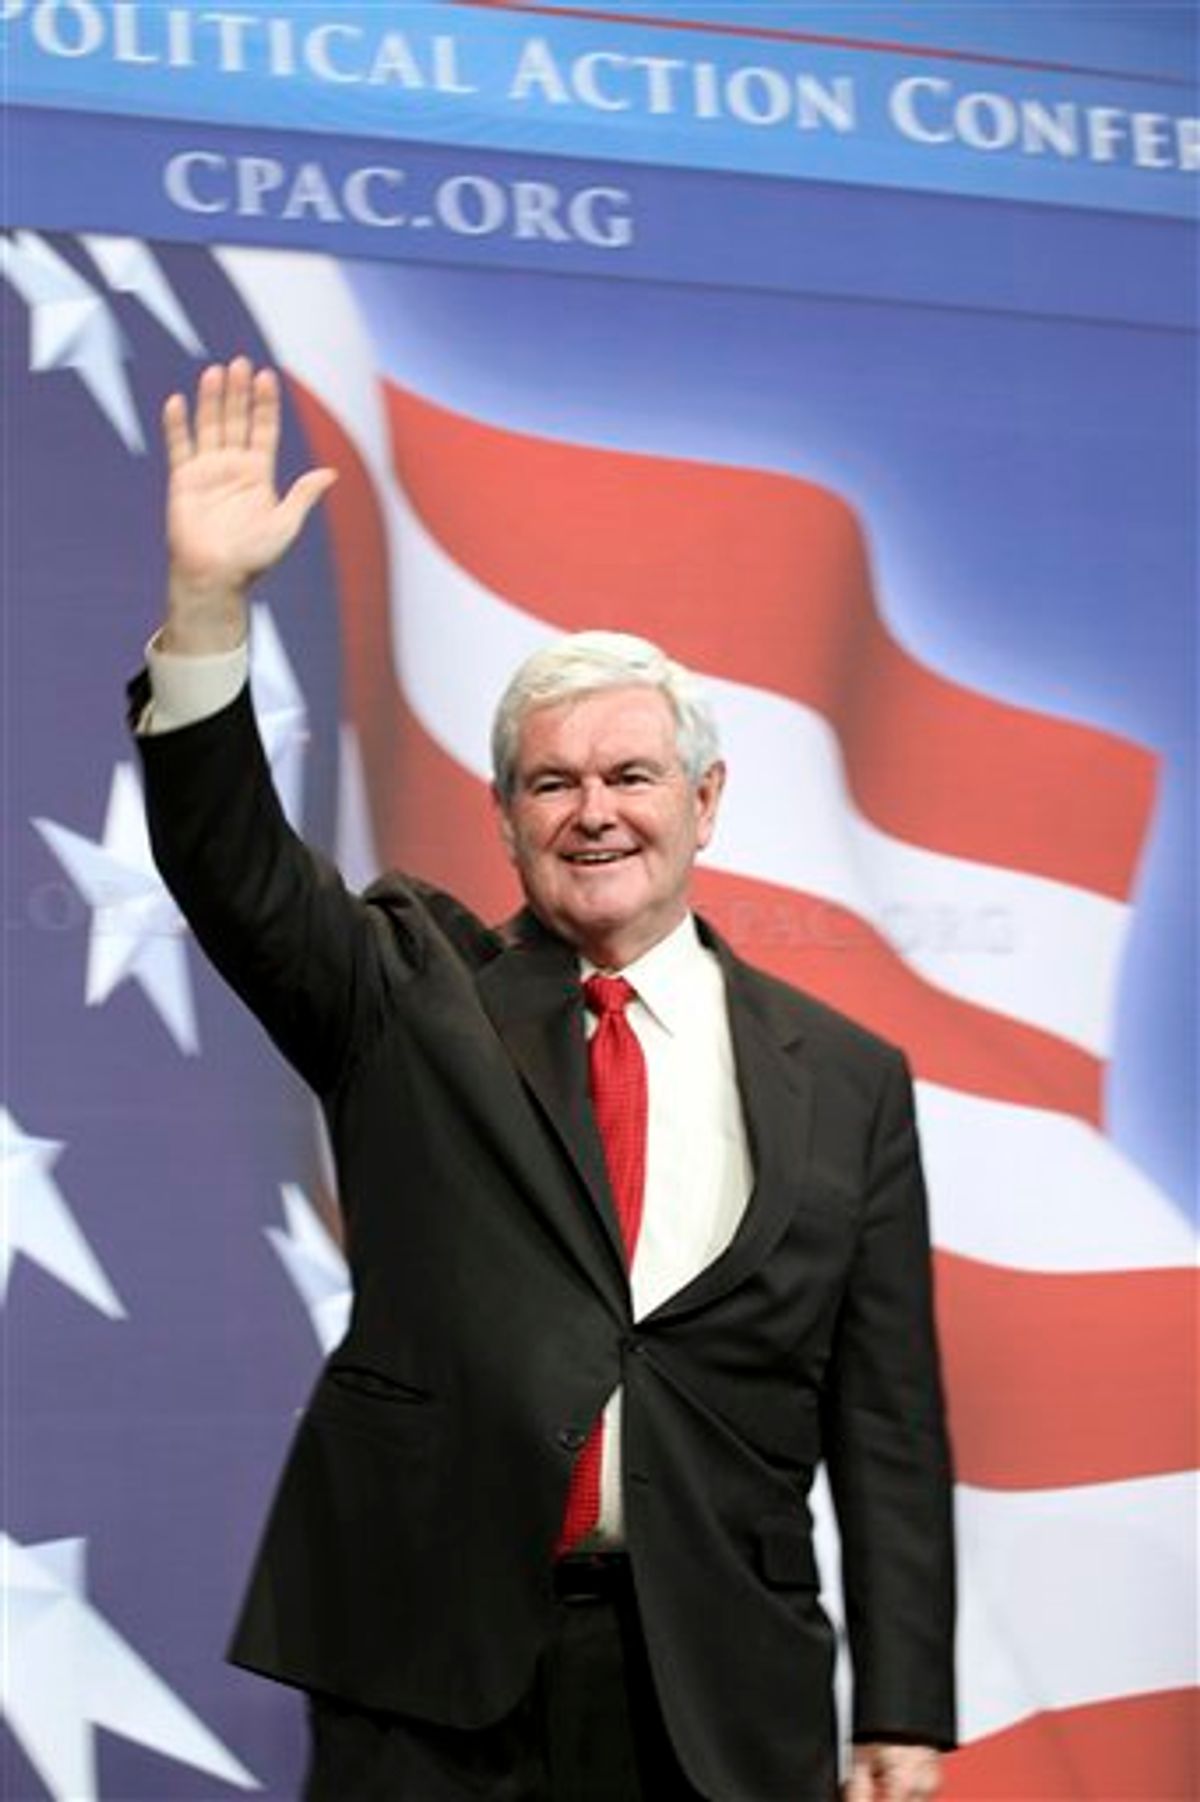 FILE - In this Feb. 20, 2010, file photo, former House Speaker Newt Gingrich waves to his supporters after addressing the Conservative Political Action Conference (CPAC)  in Washington. Gingrich may be running for the Republican presidential nomination. Or maybe he is just running all the way to the bank.  (AP Photo/Jose Luis Magana, File)  (AP)